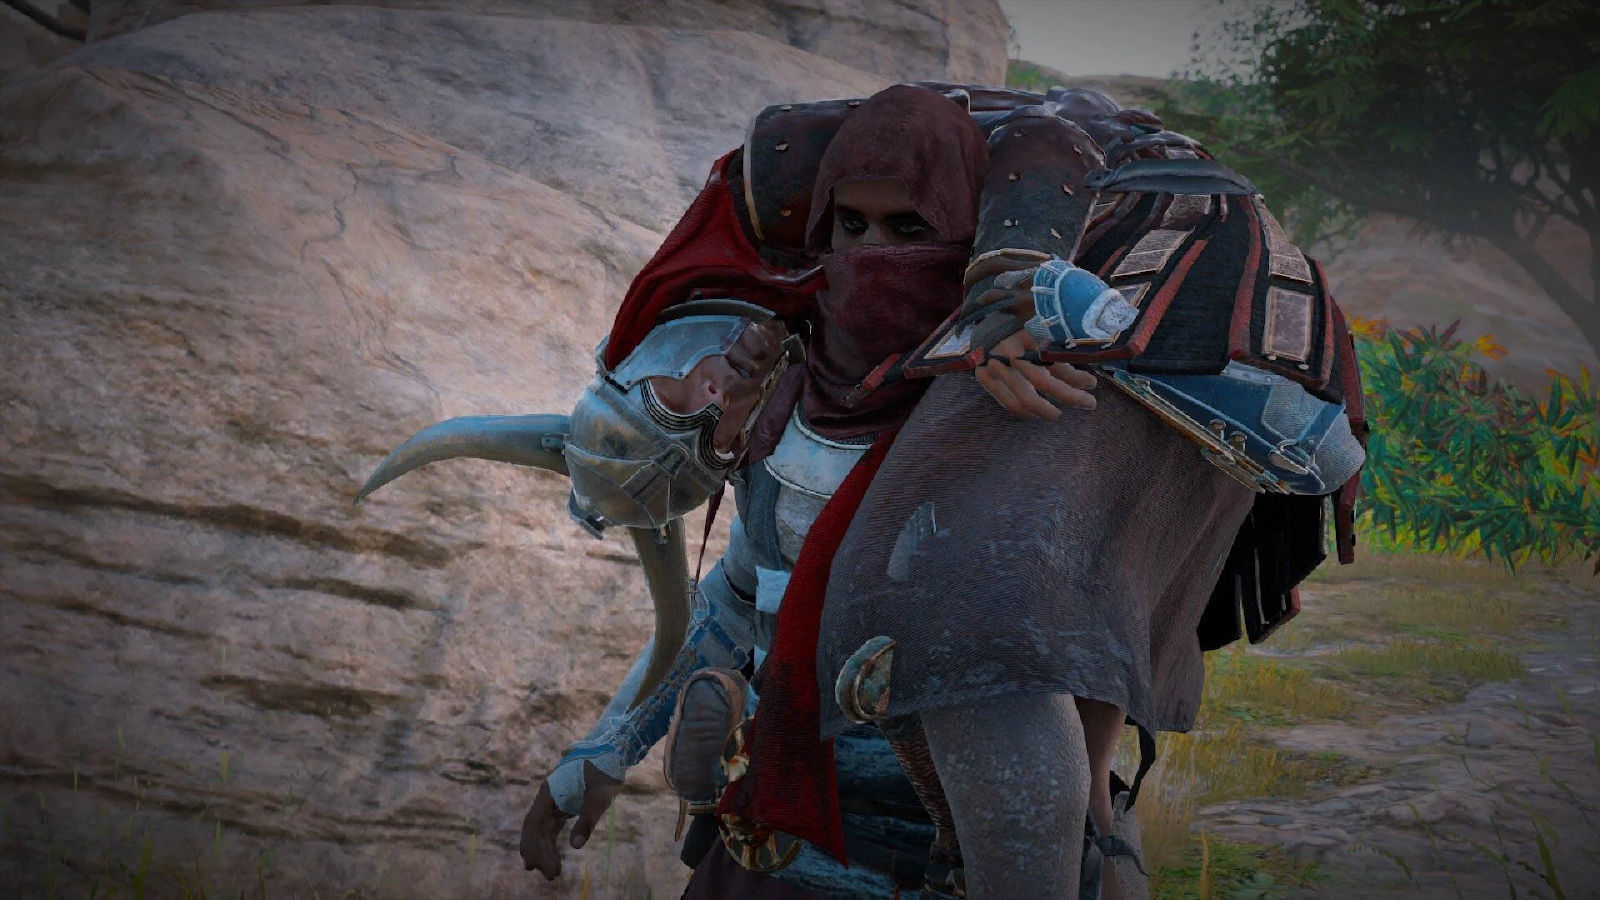 Image of Bayek Carrying an Assassins Creed Origins Phylakes